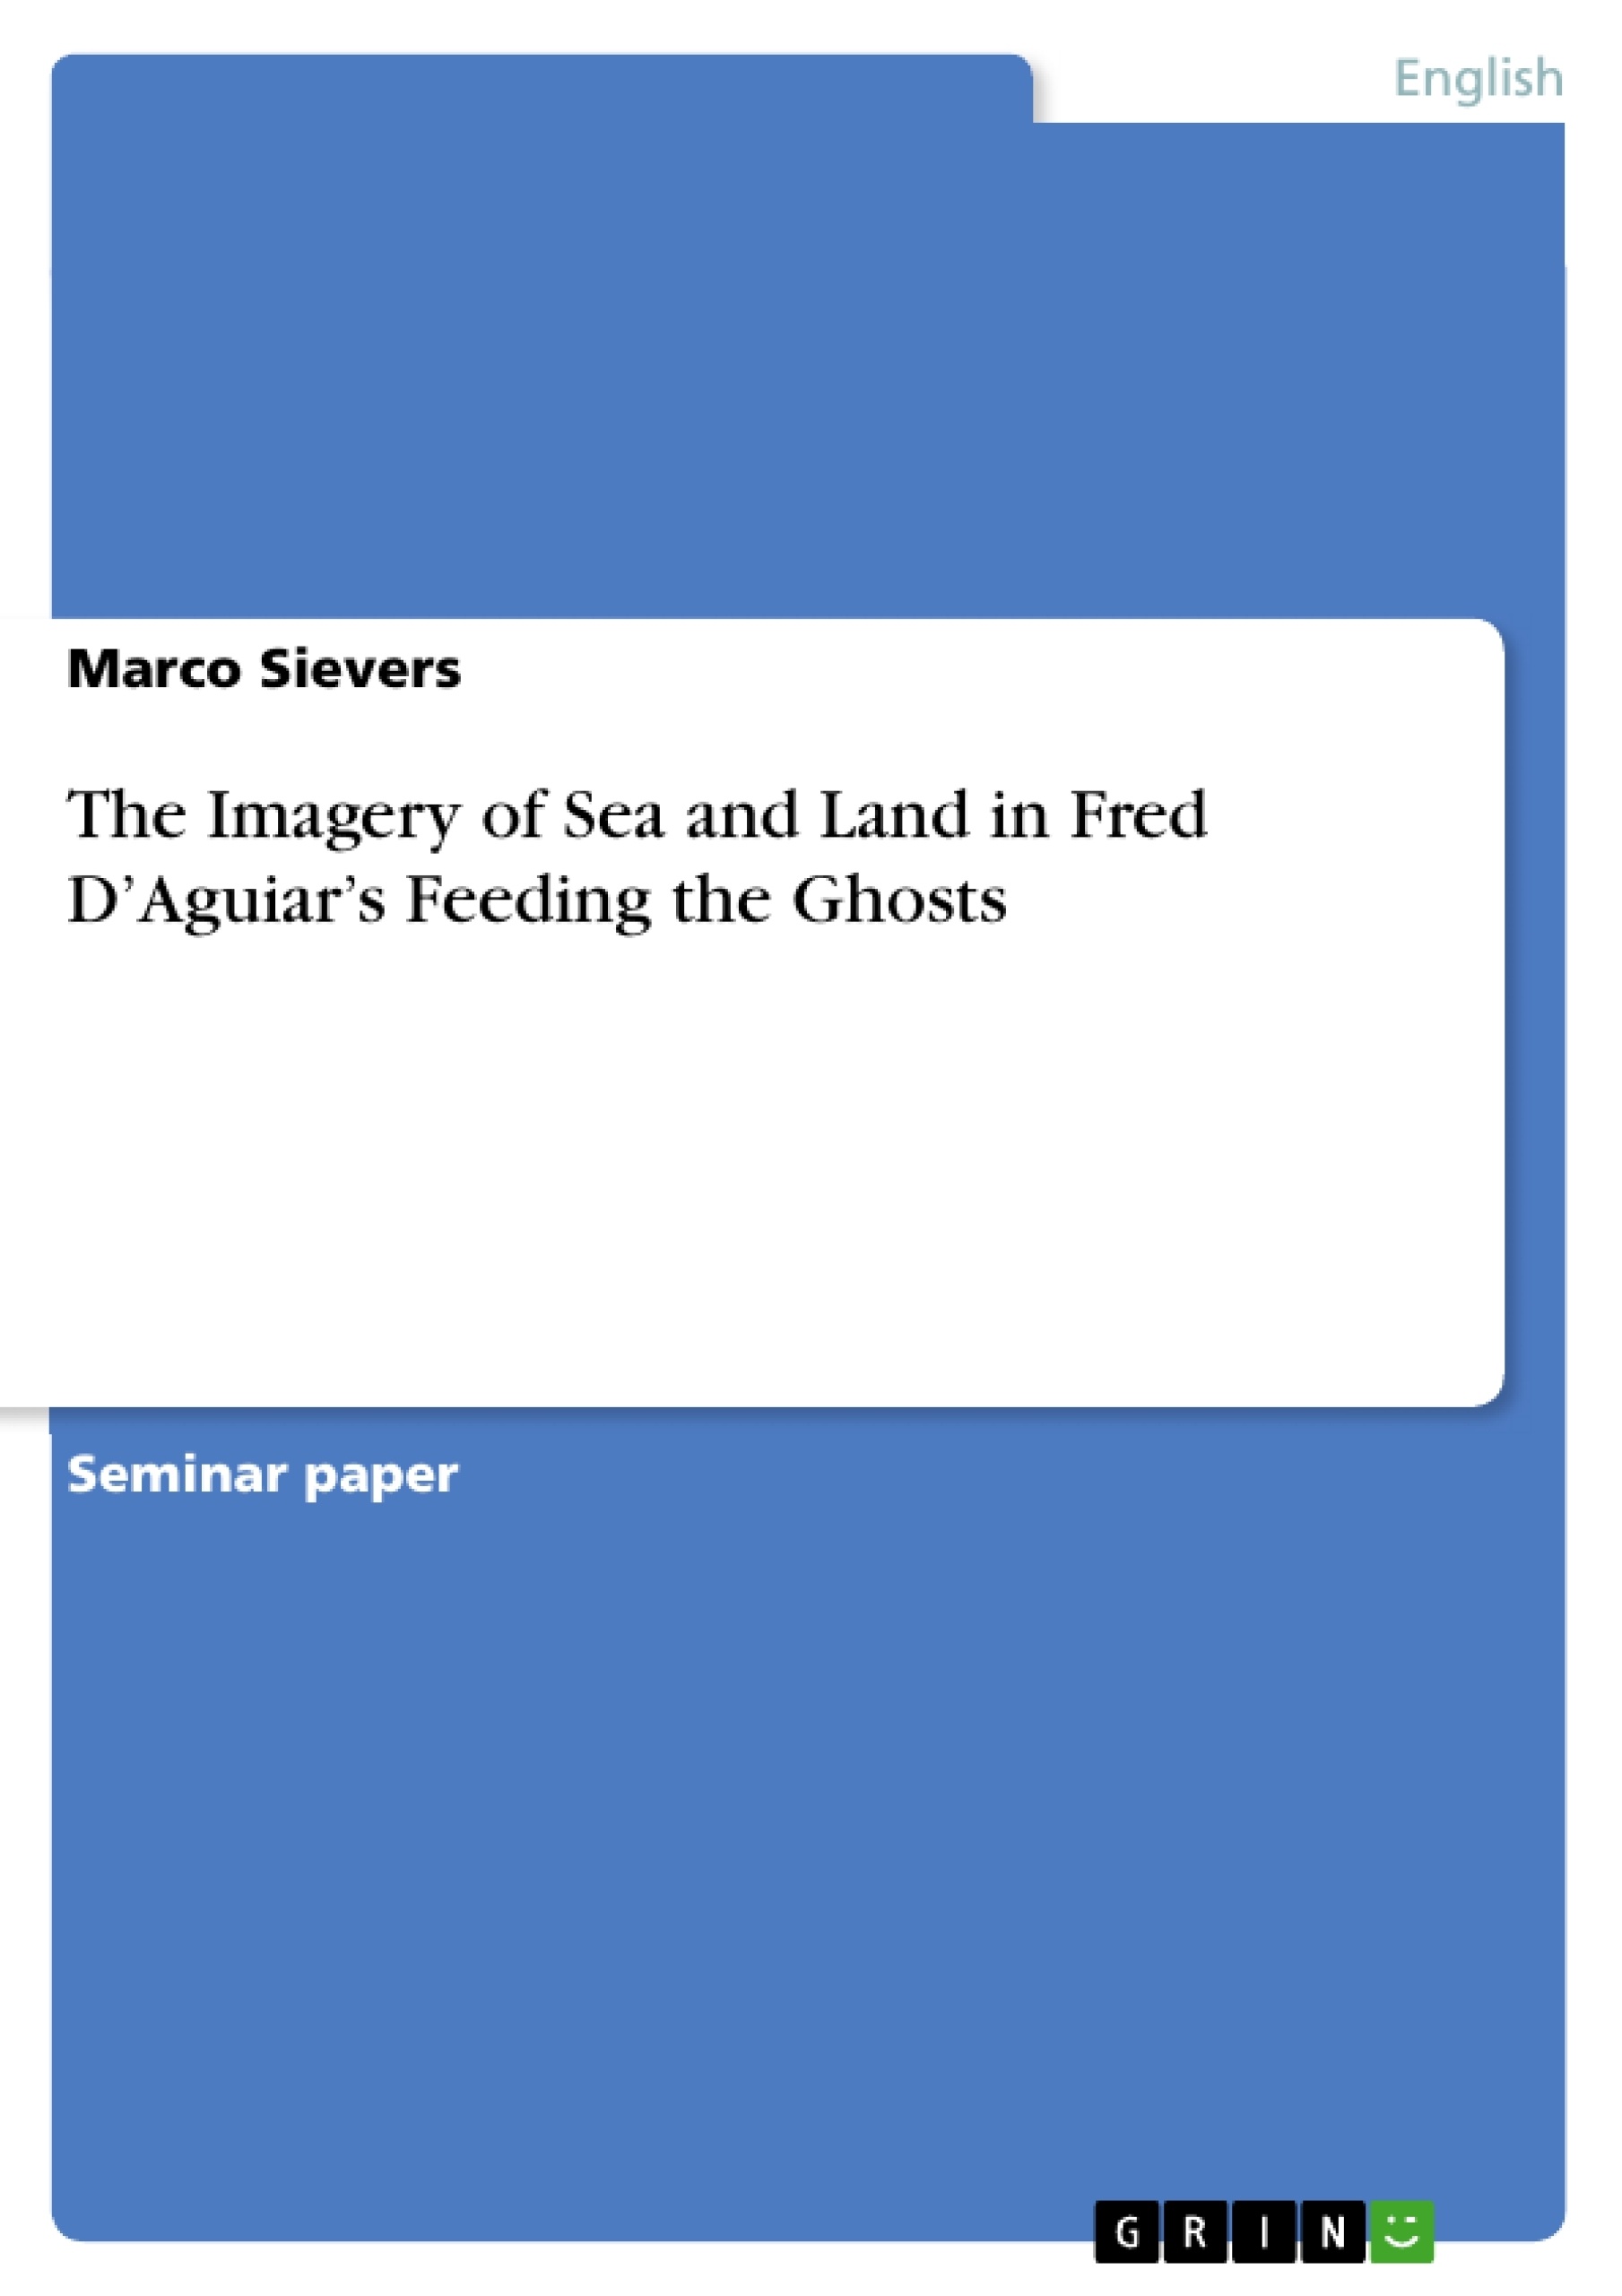 Titel: The Imagery of Sea and Land in Fred D’Aguiar’s Feeding the Ghosts 